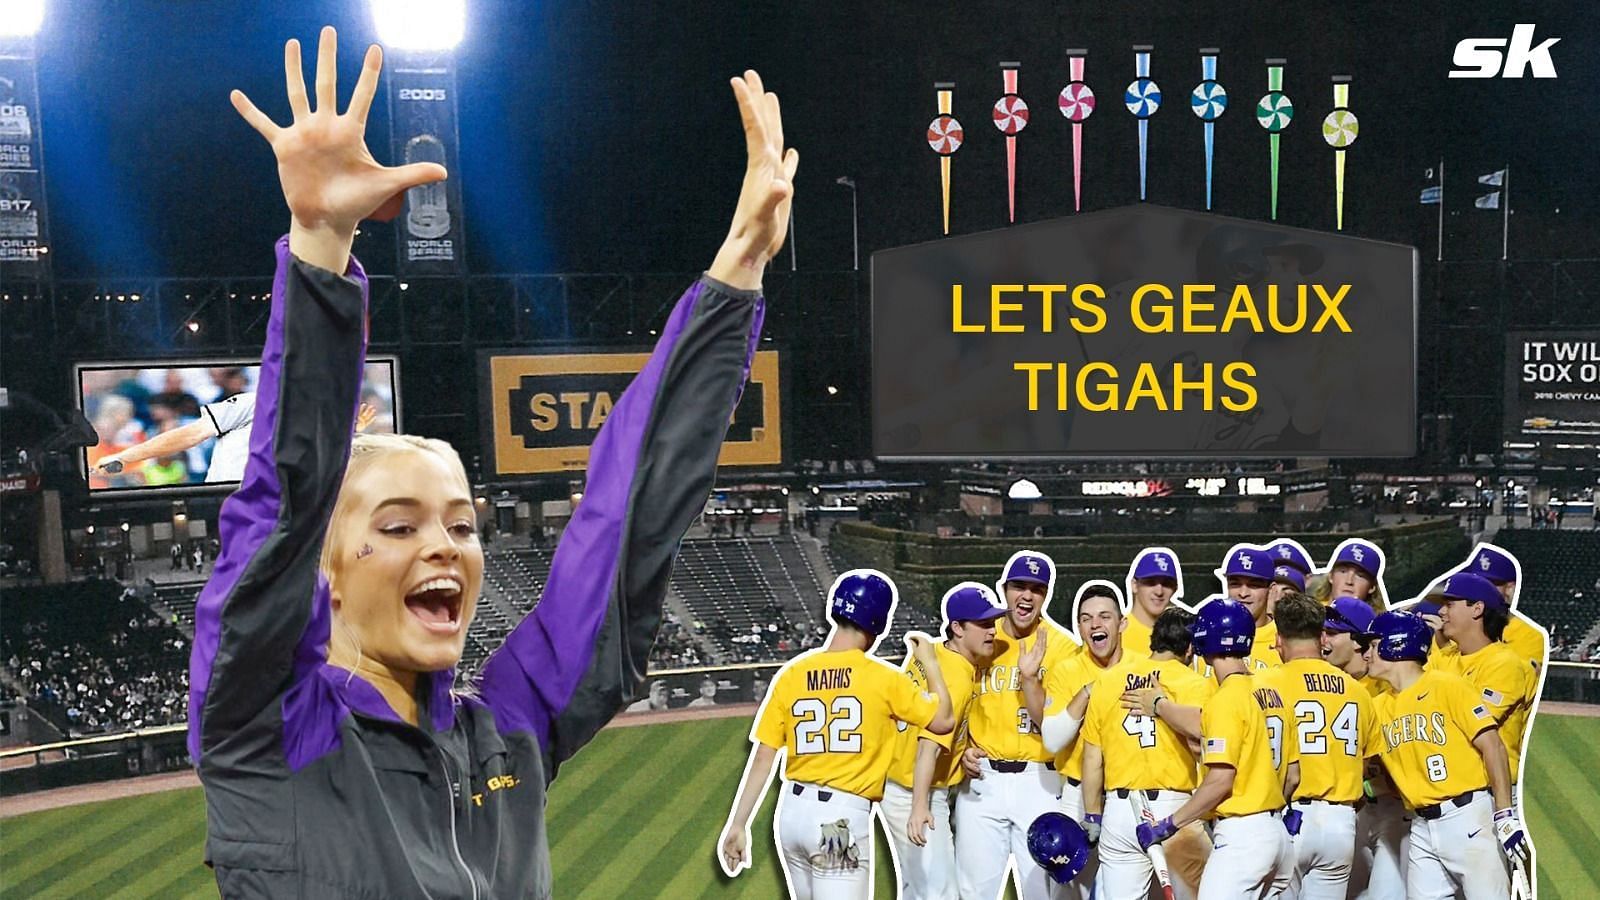 &quot;Geaux Tigers&quot; - LSU gymnast Olivia Dunne elated by Tigers run to College World Series finals, celebrates wild walk-off victory after Tommy White walk-off